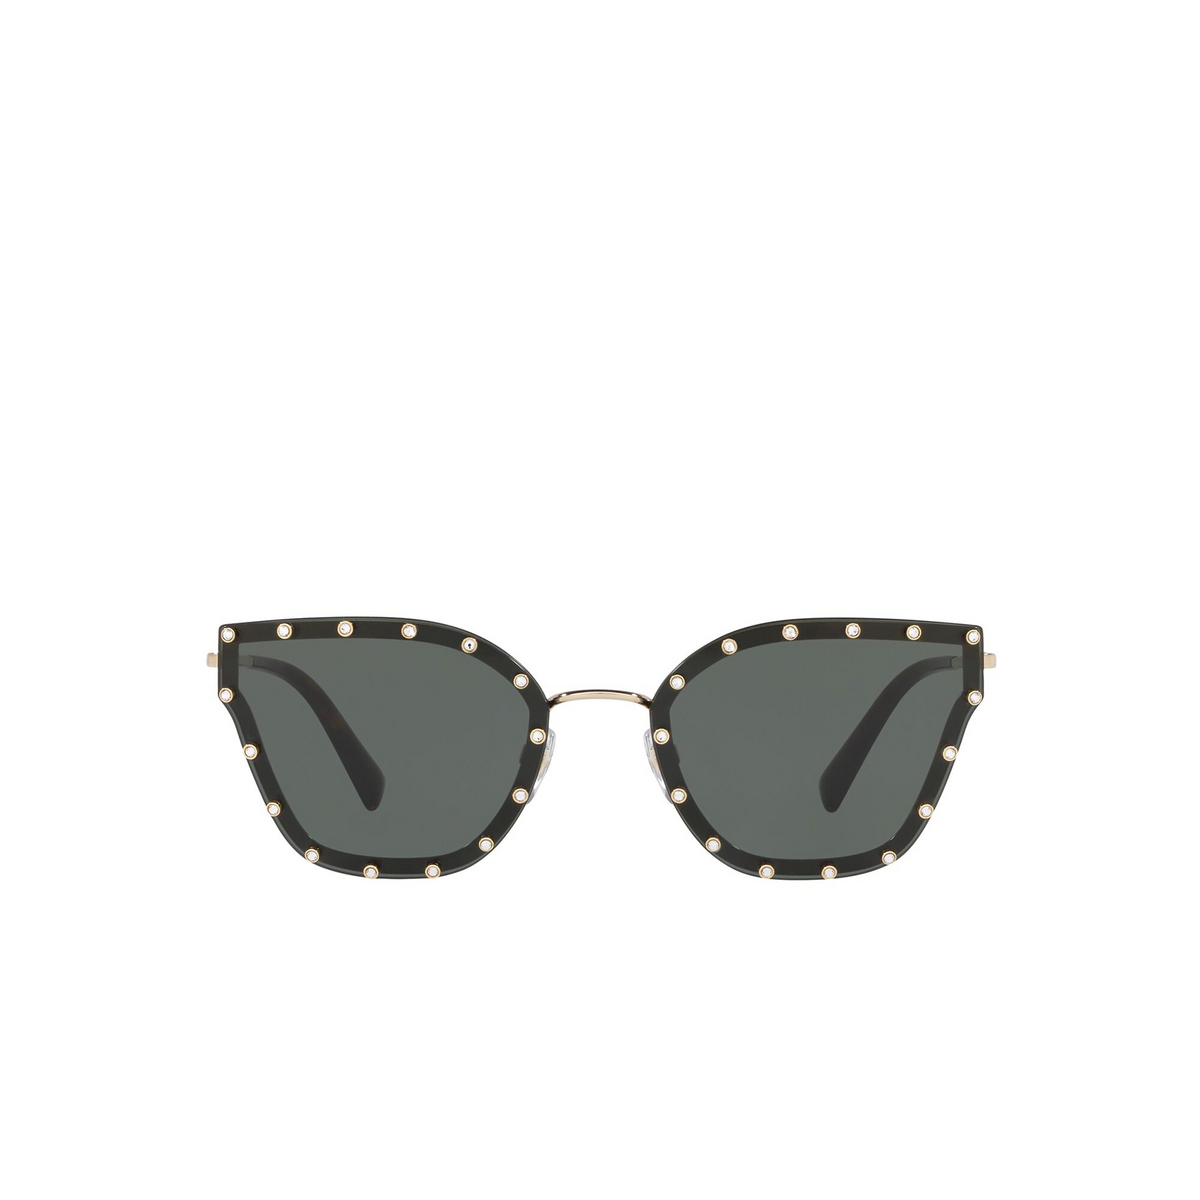 Valentino® Butterfly Sunglasses: VA2028 color Light Gold 300371 - front view.